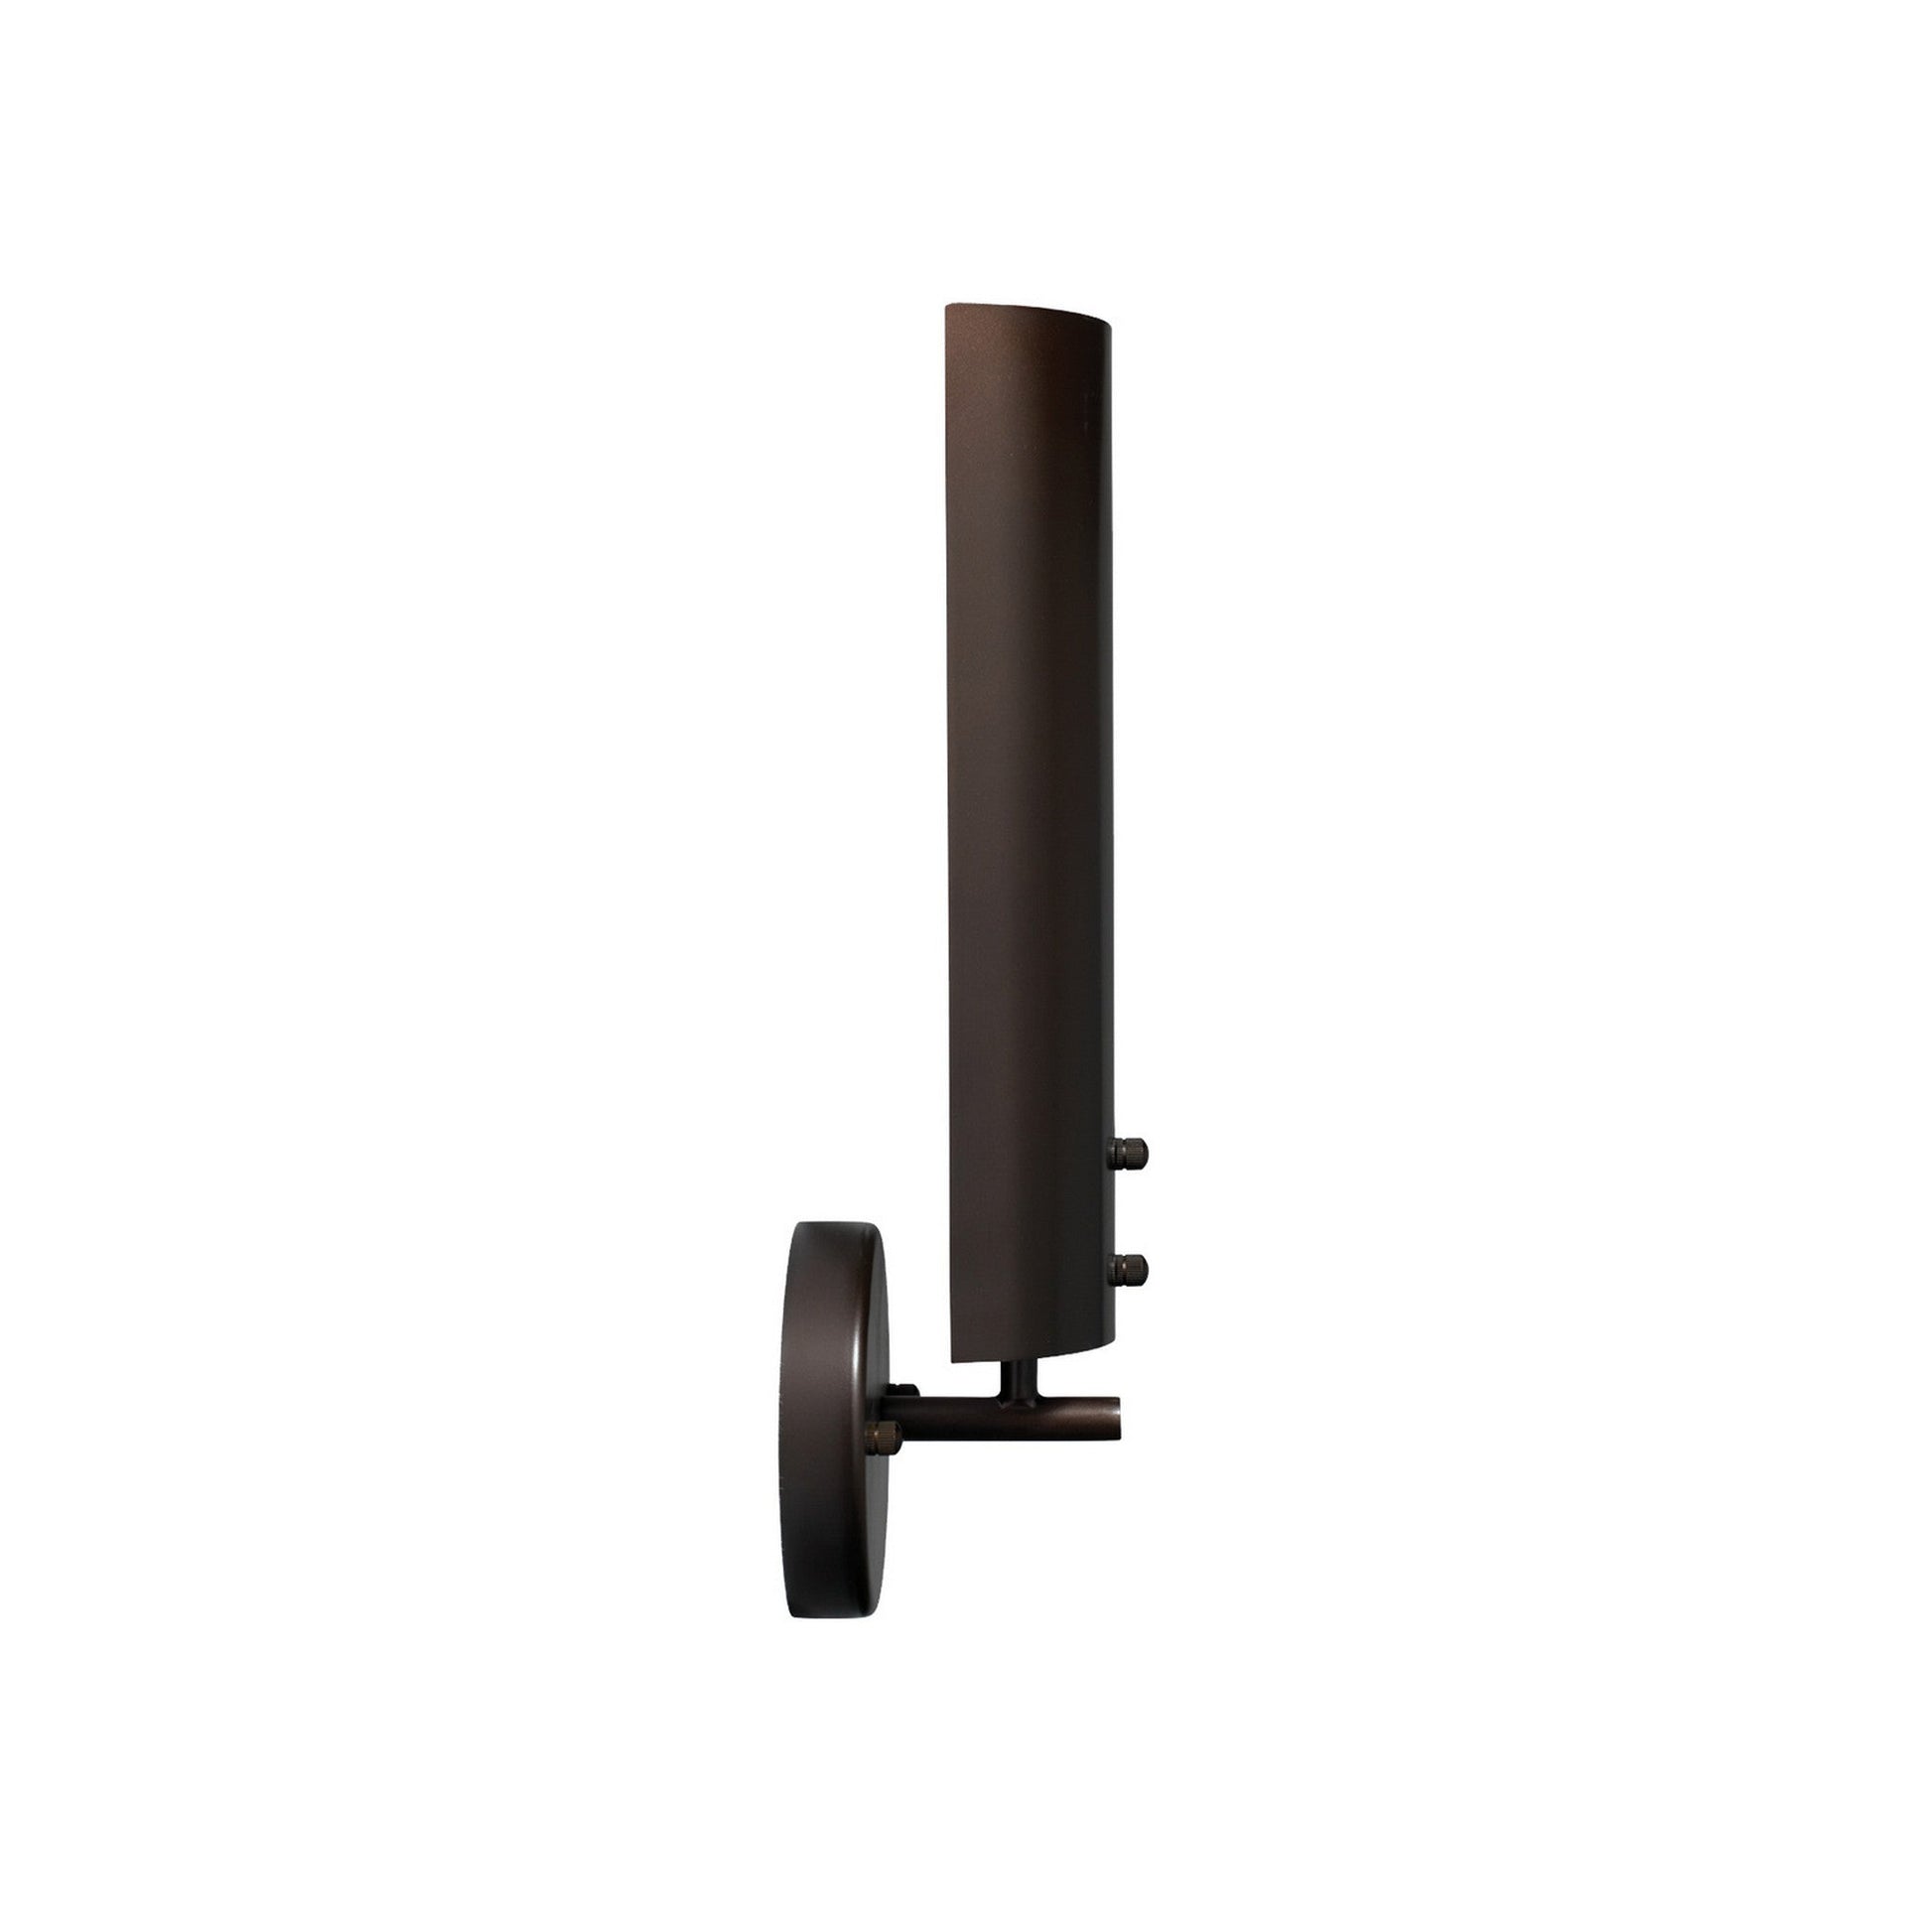 Jamie Young Olympic 5" x 16" 1-Light Oil Rubbed Bronze Metal Wall Sconce